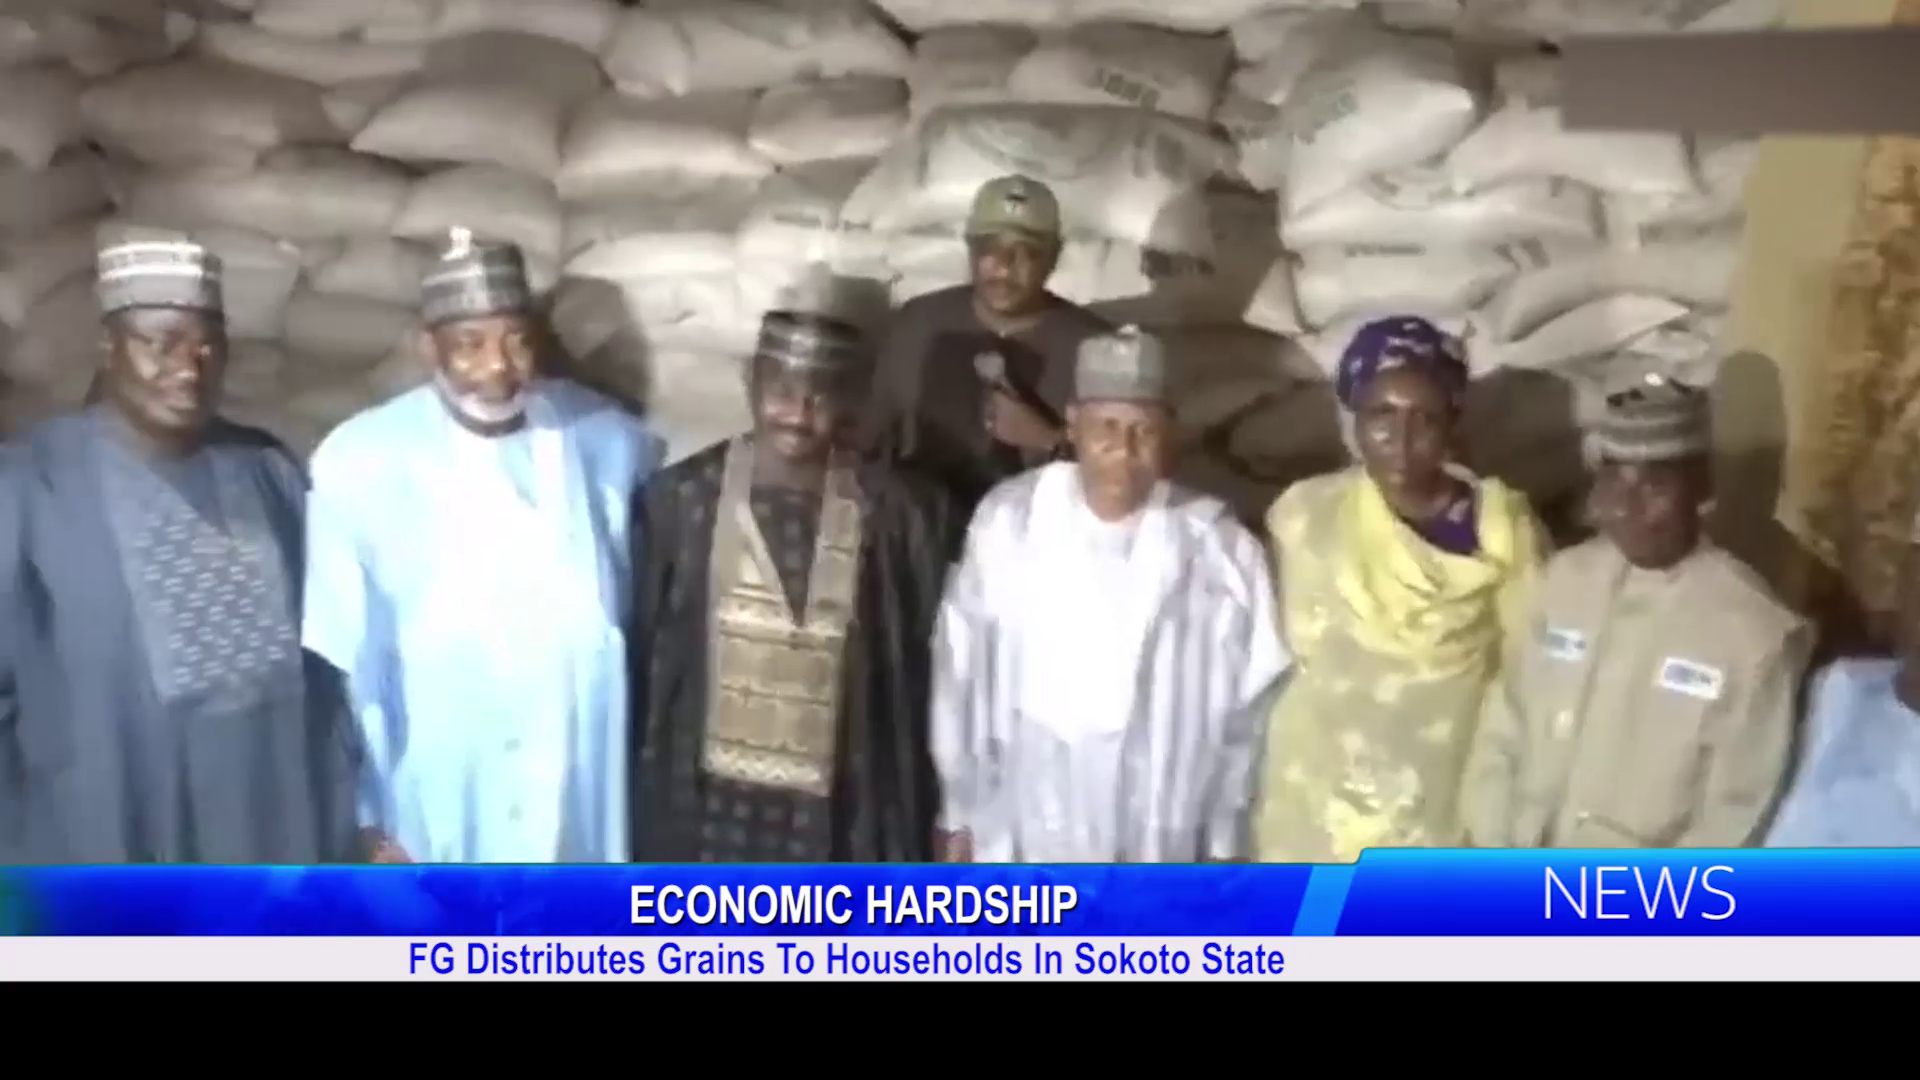 FG Distributes Grains To Households In Sokoto State